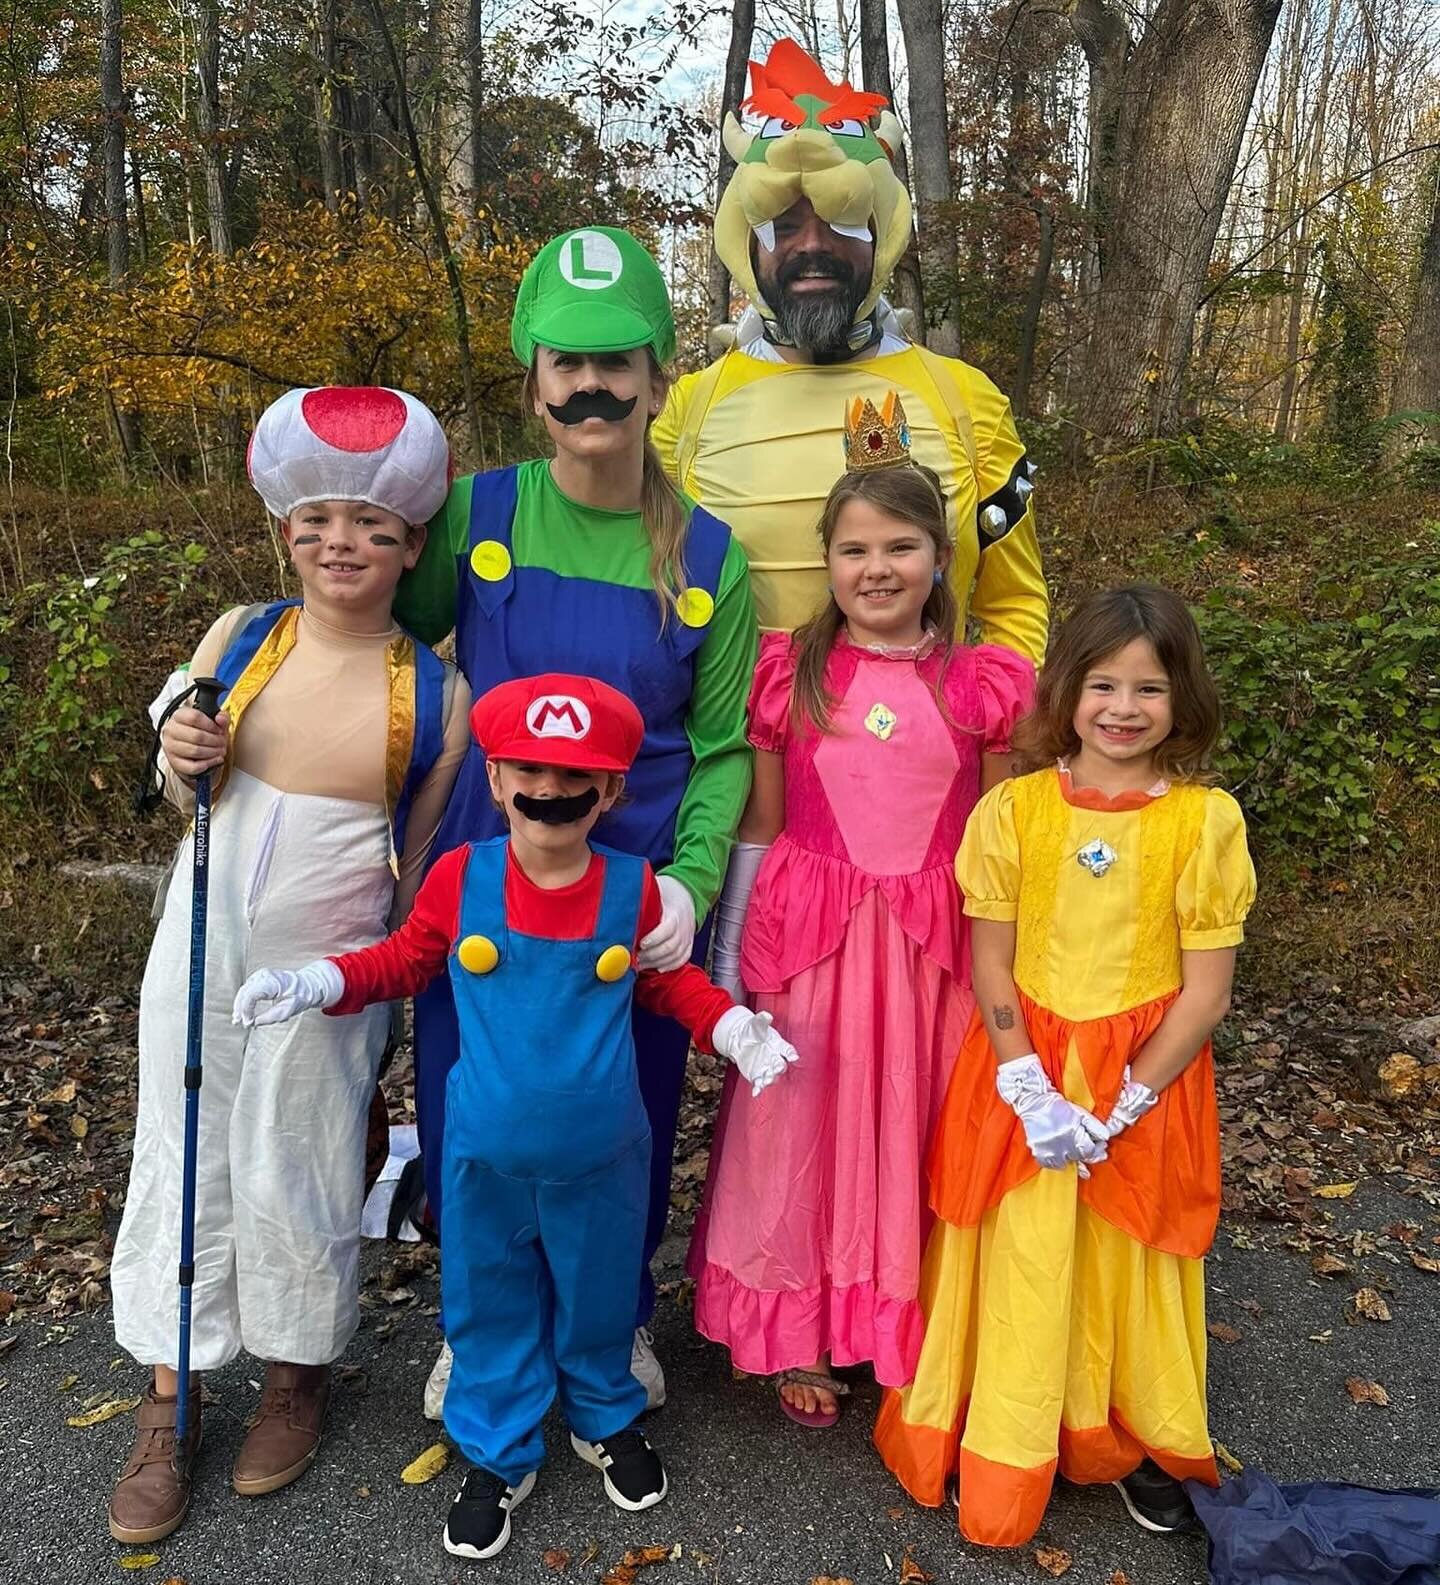 Happy Halloween! Enjoy the day like @aaron_tagert and his family. #committed #connected #courageous #happyhalloween #dadsofsteele